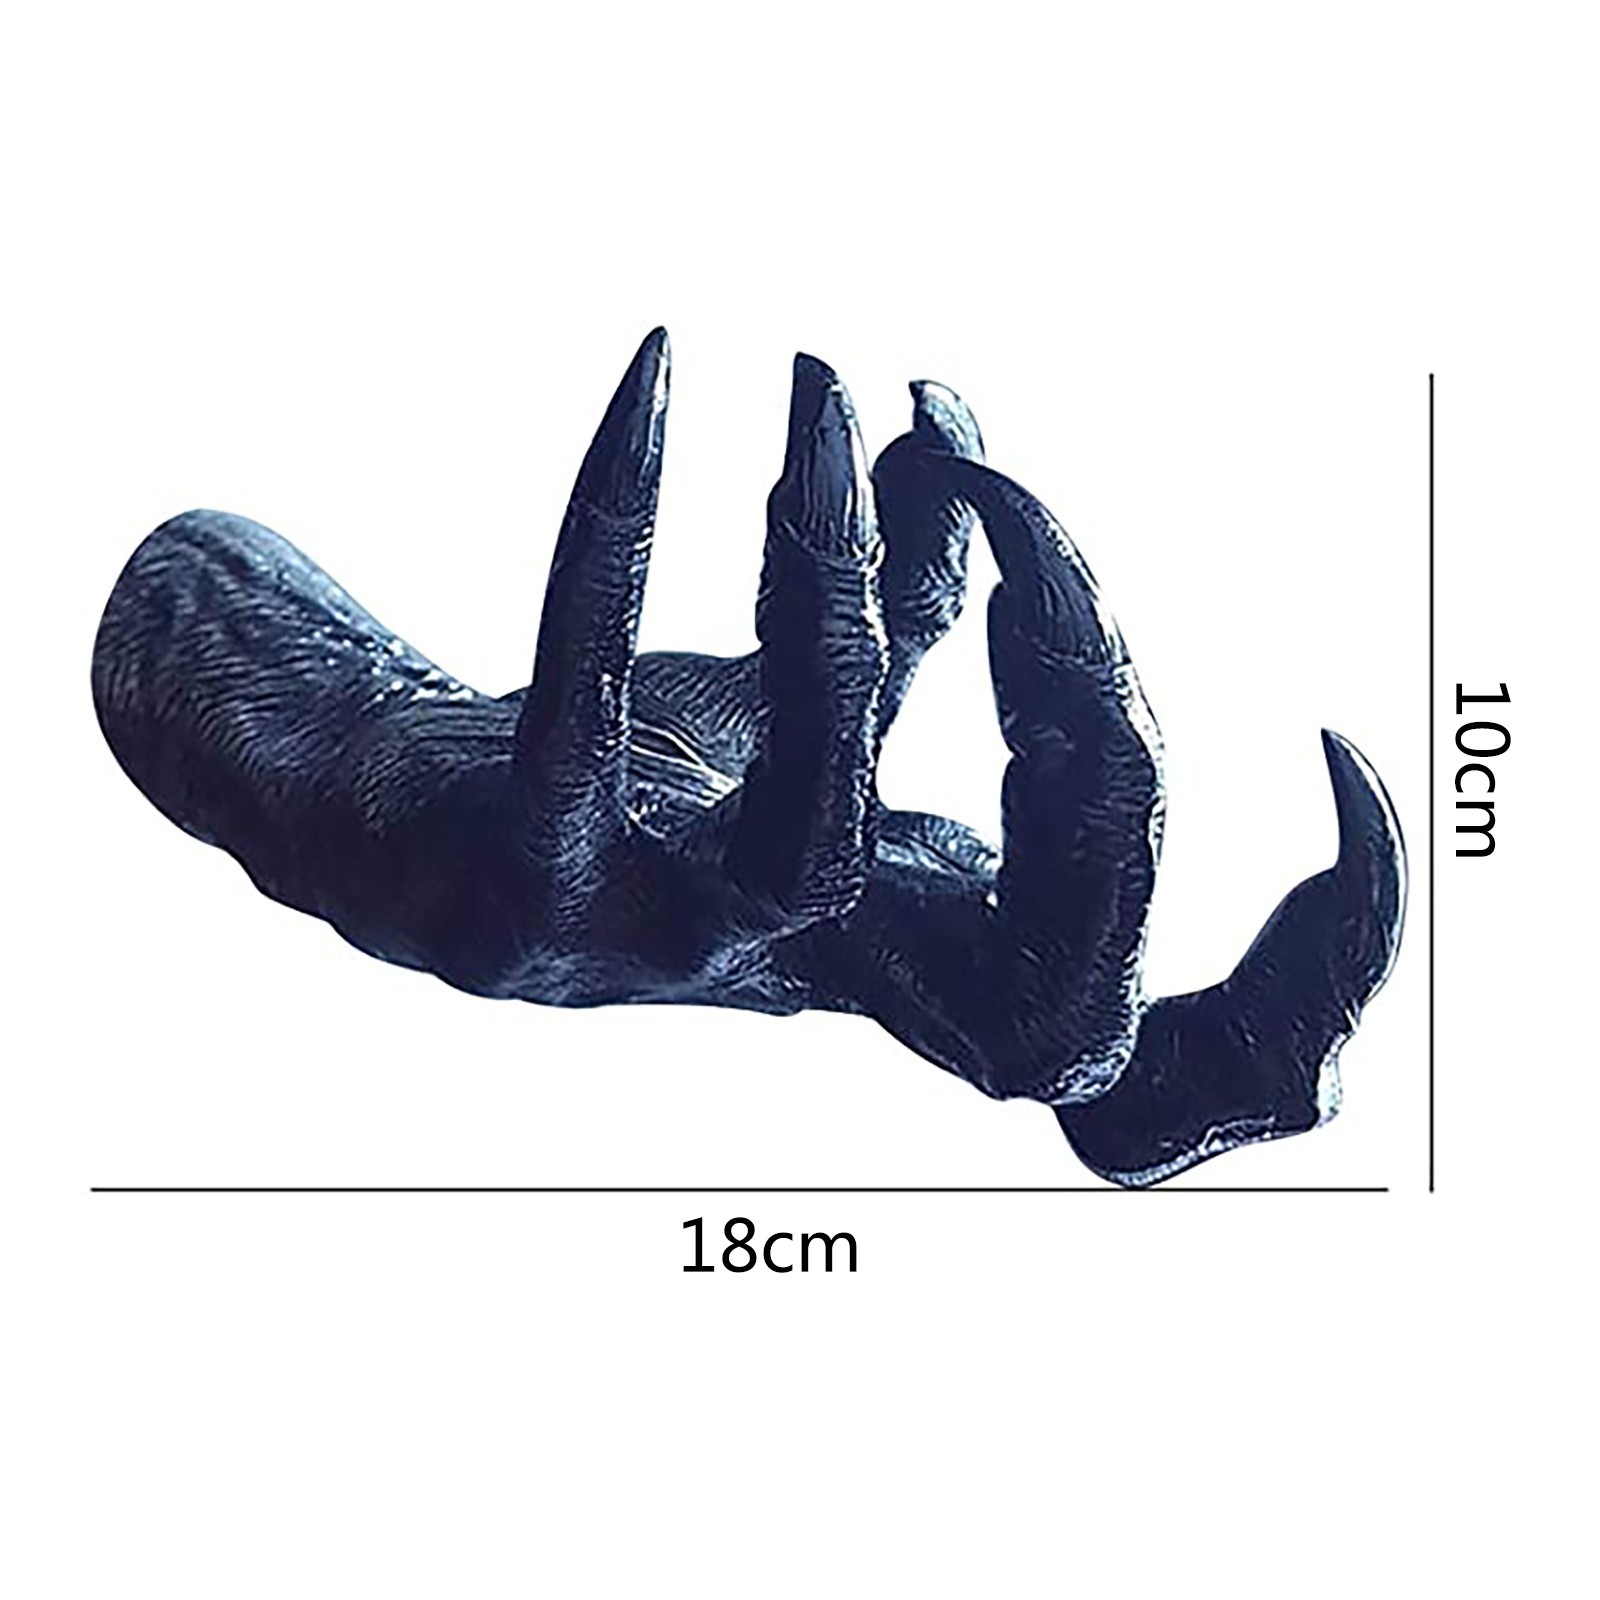  Hand Witch Decor Wall Hanging Statues Creative Wall Decor Resin Aesthetic Art Sculpture Retro Wall Witch Hand Ornament